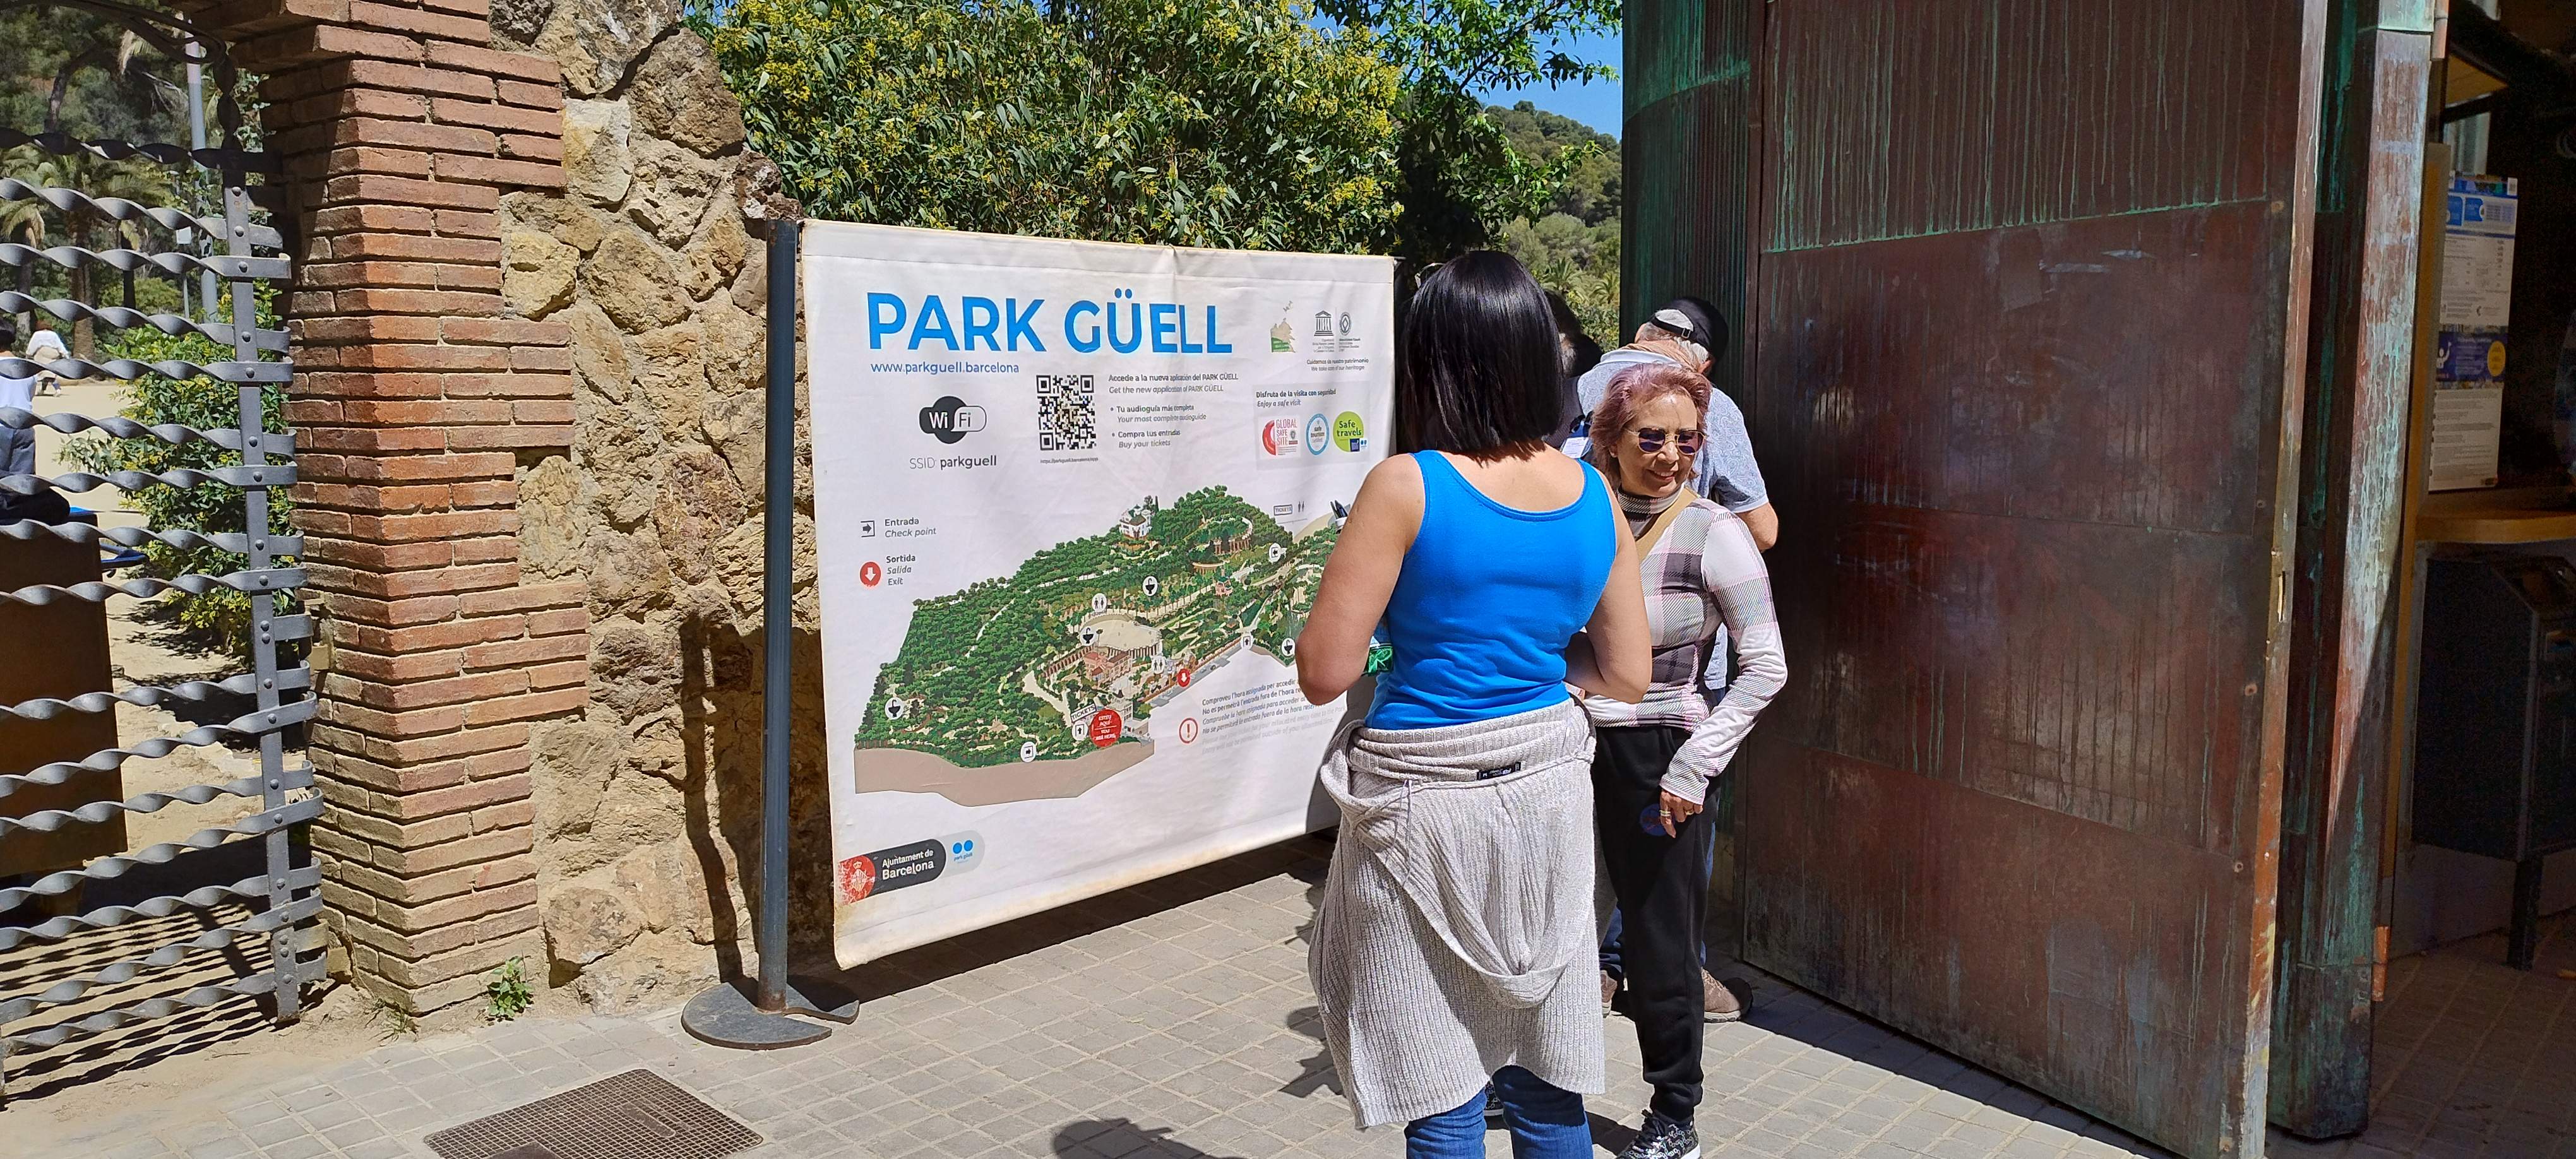 Barcelona's Park Güell: tickets are to be sold exclusively online from July 1st